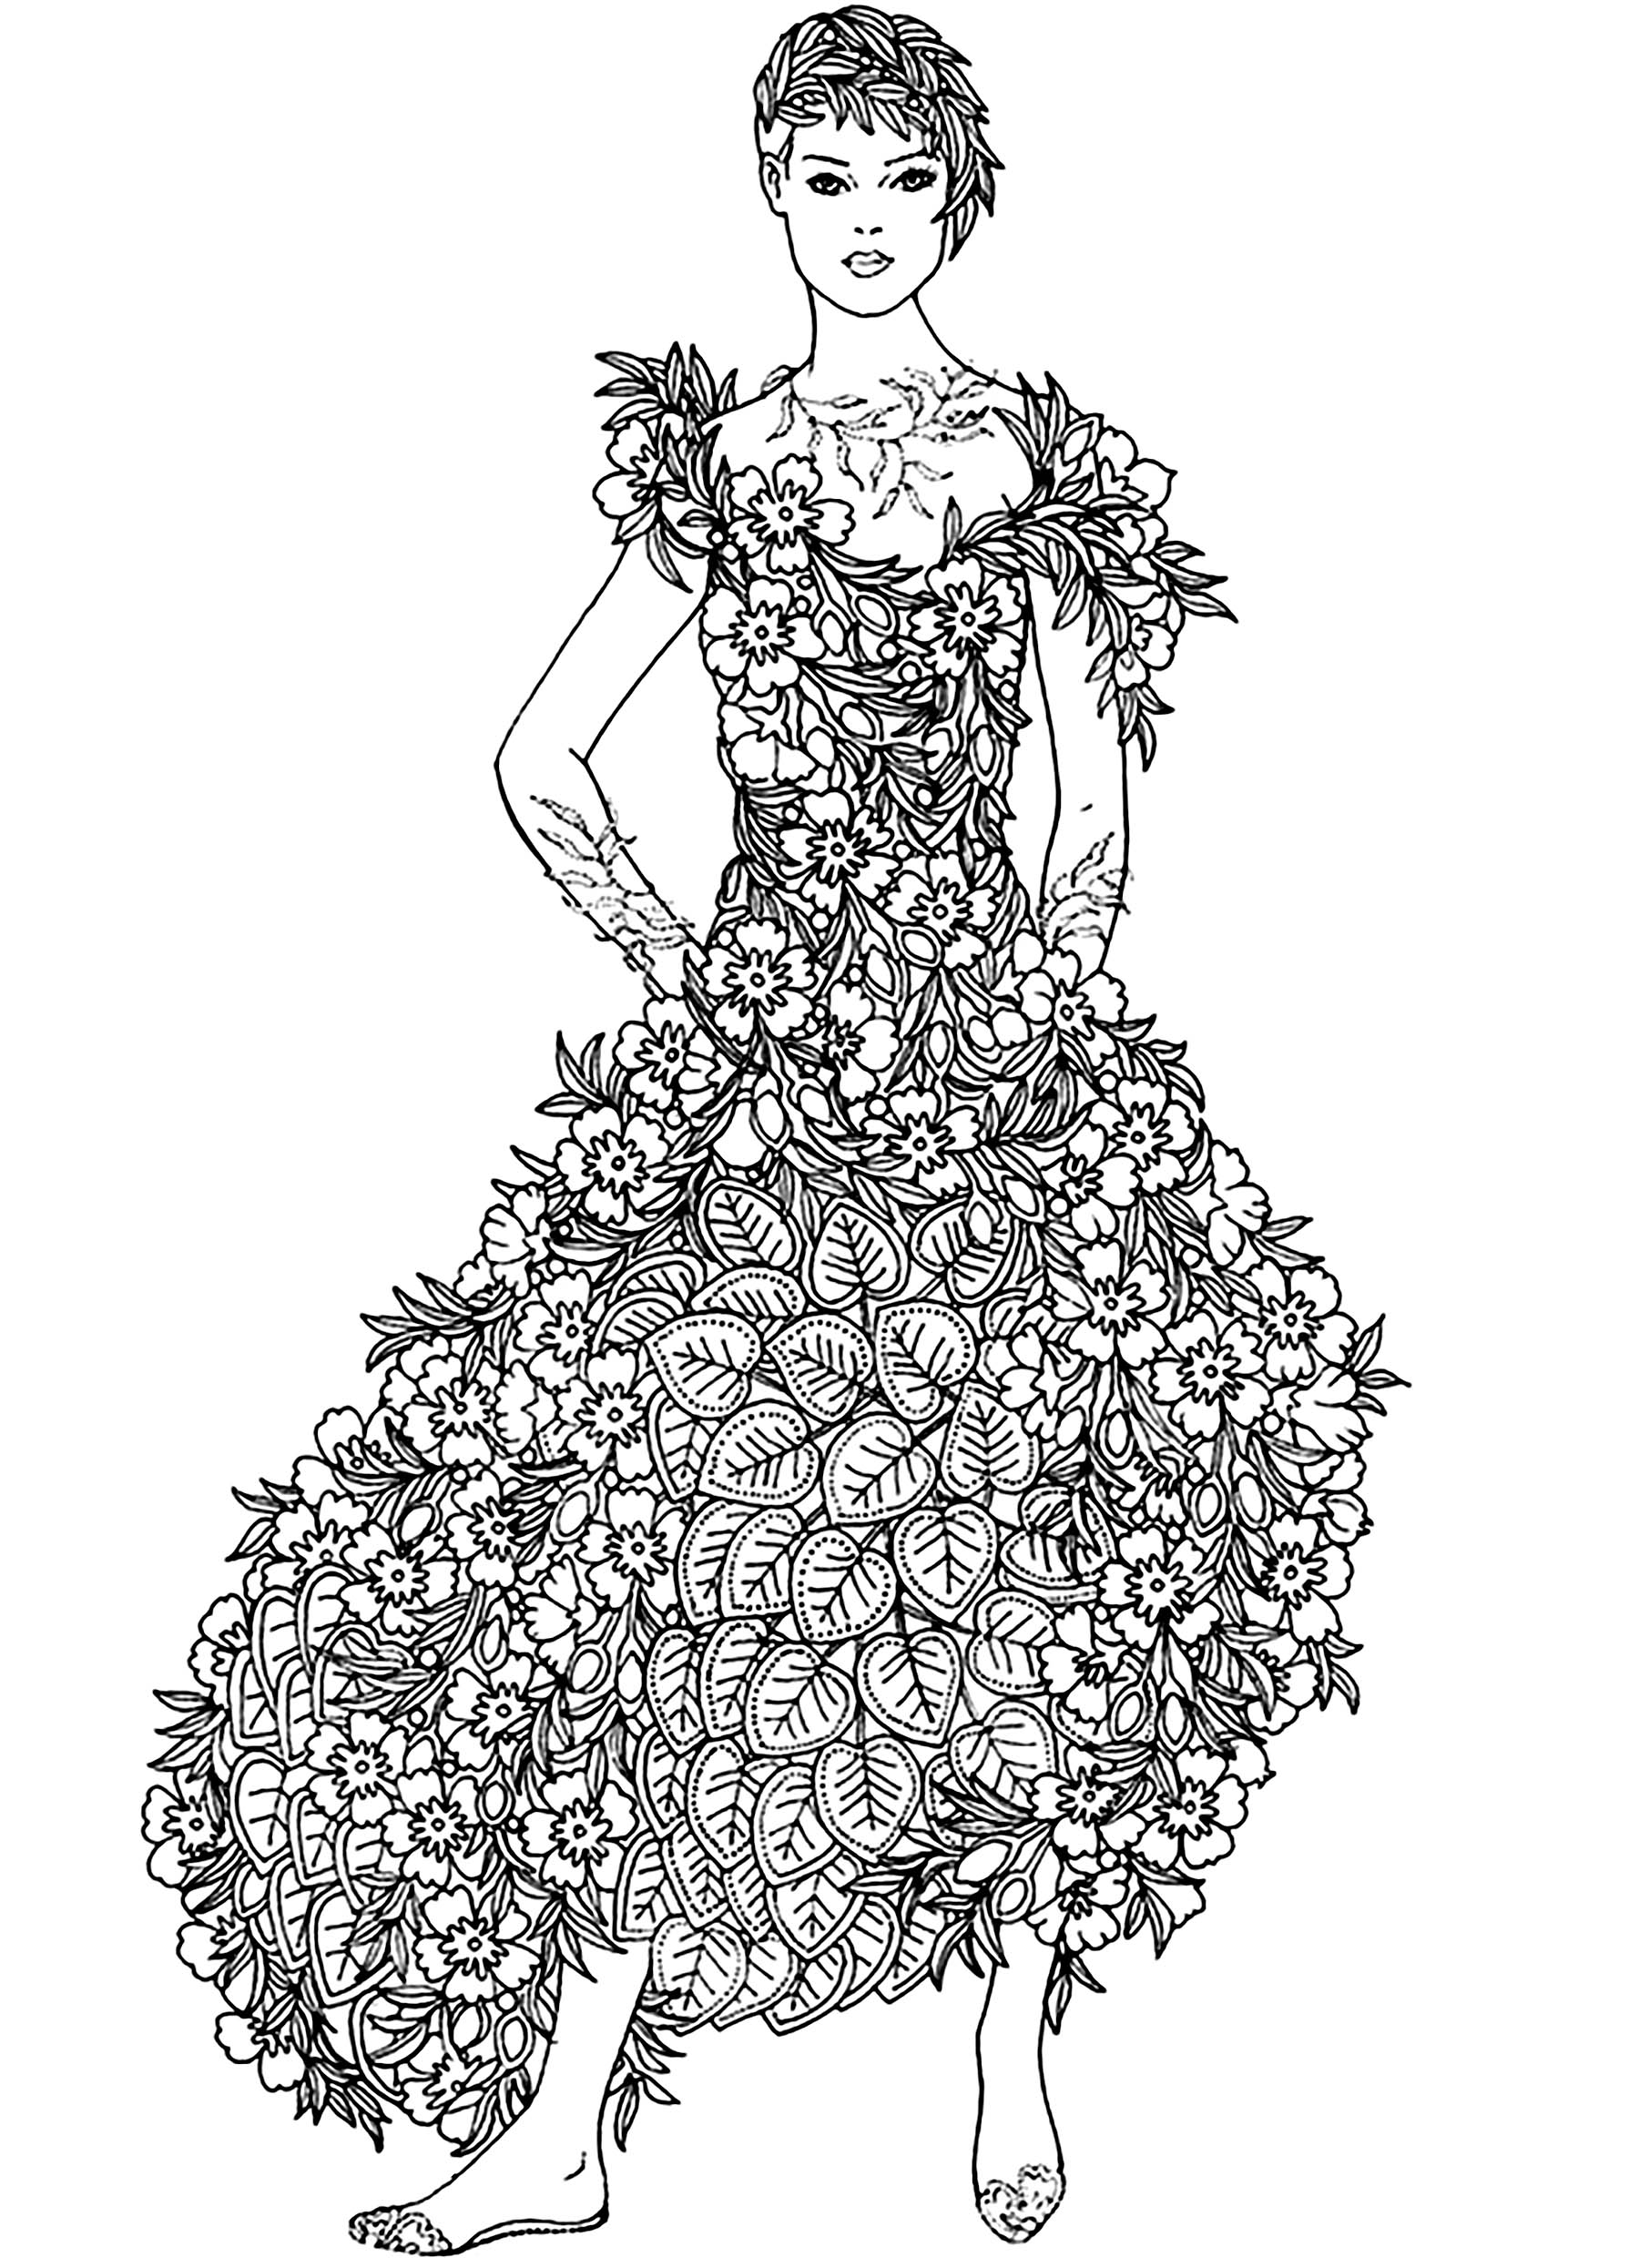 Incredible dress made with only true flowers